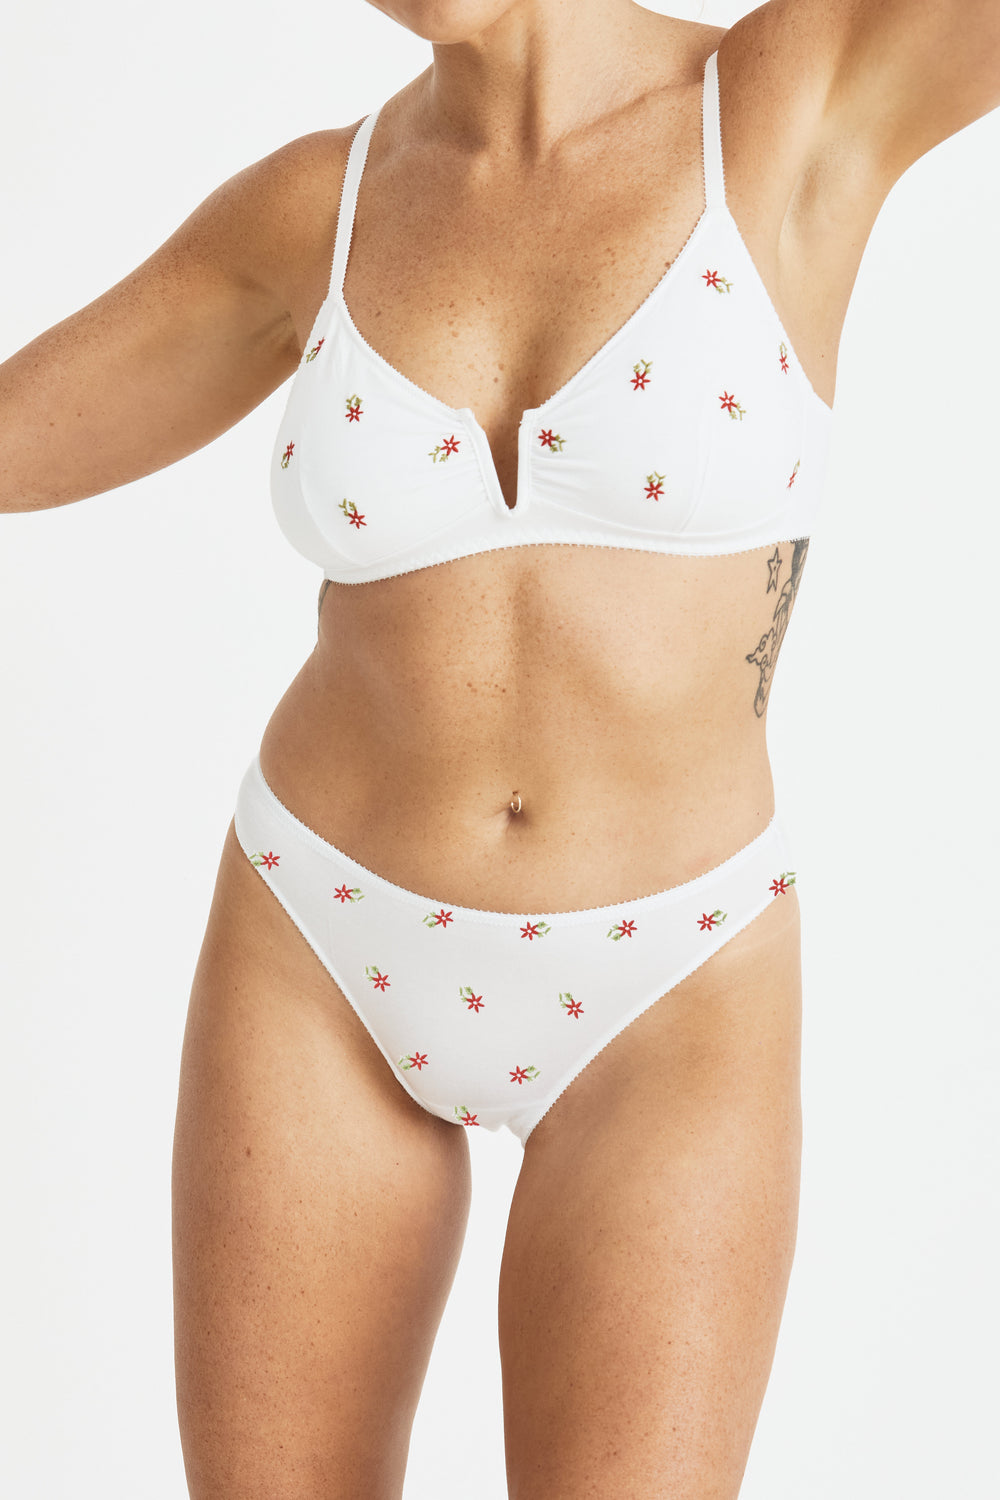 Videris Lingerie bikini knicker in white TENCEL™ mid-rise style cut to follow the natural curve of your hips with soft elastics